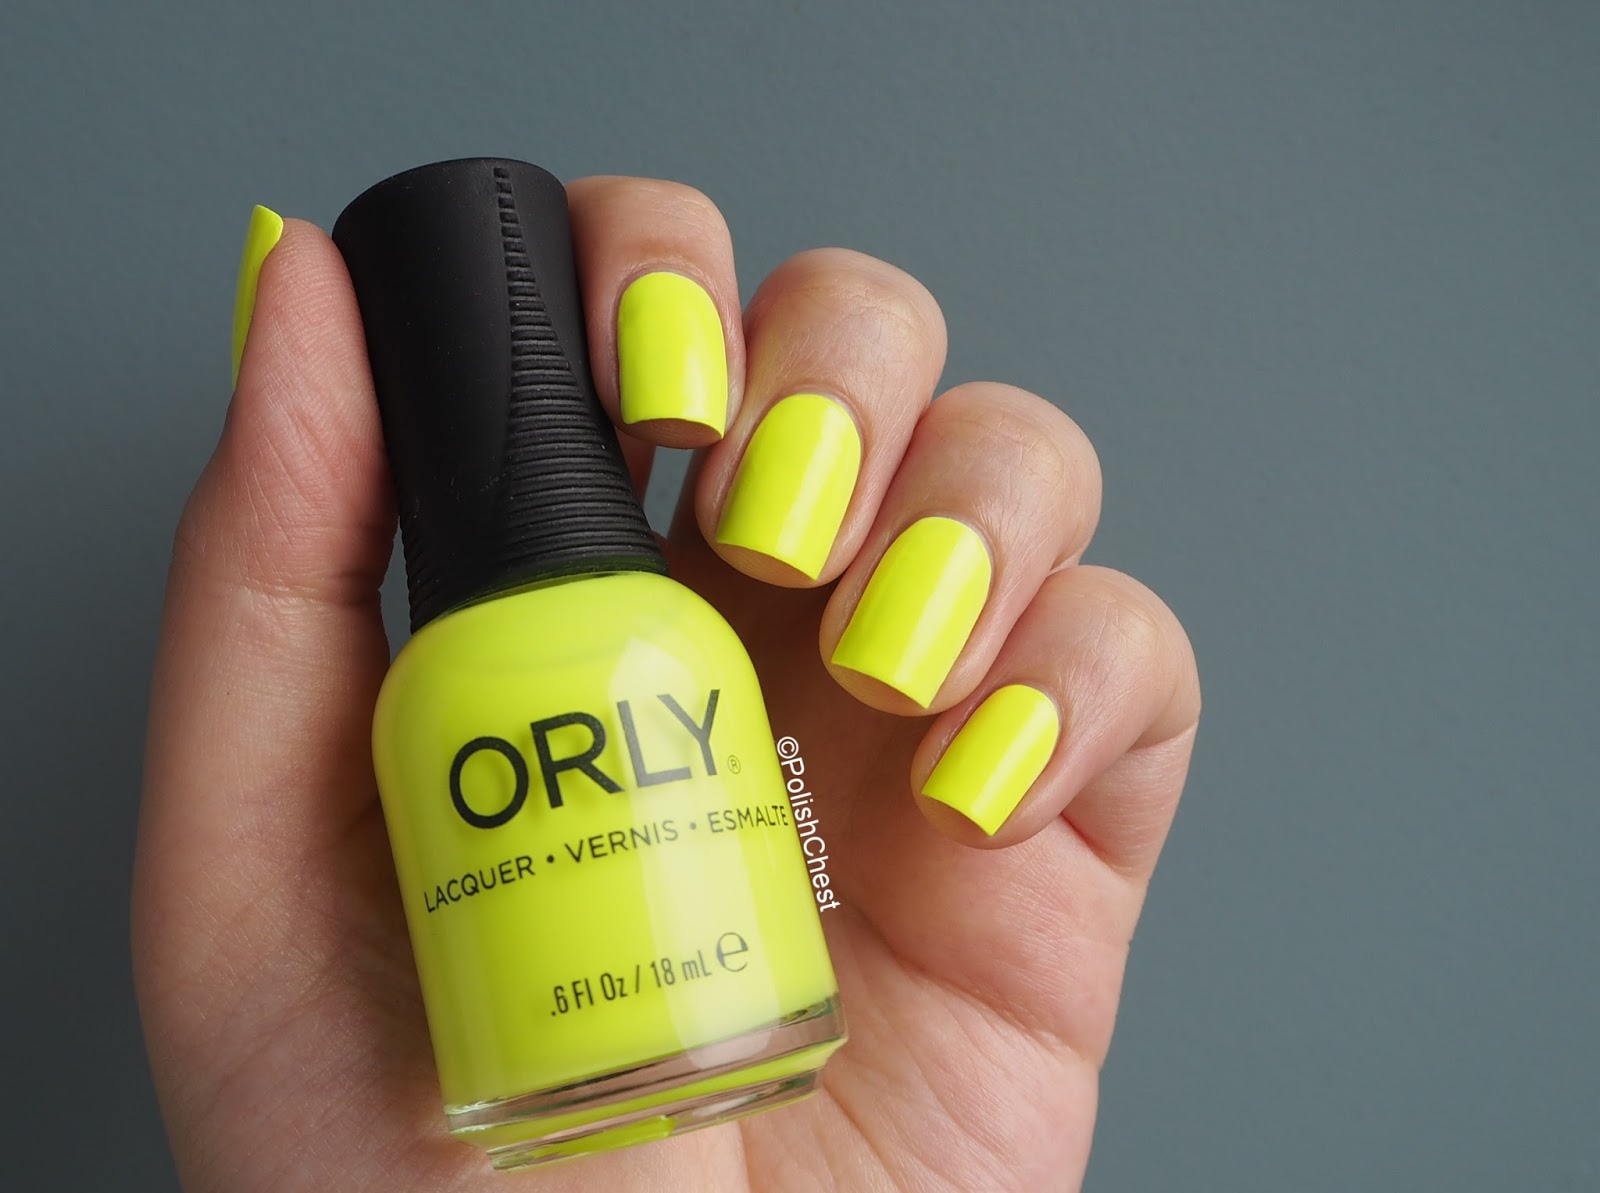 4. Orly Nail Lacquer, Glowstick - wide 1